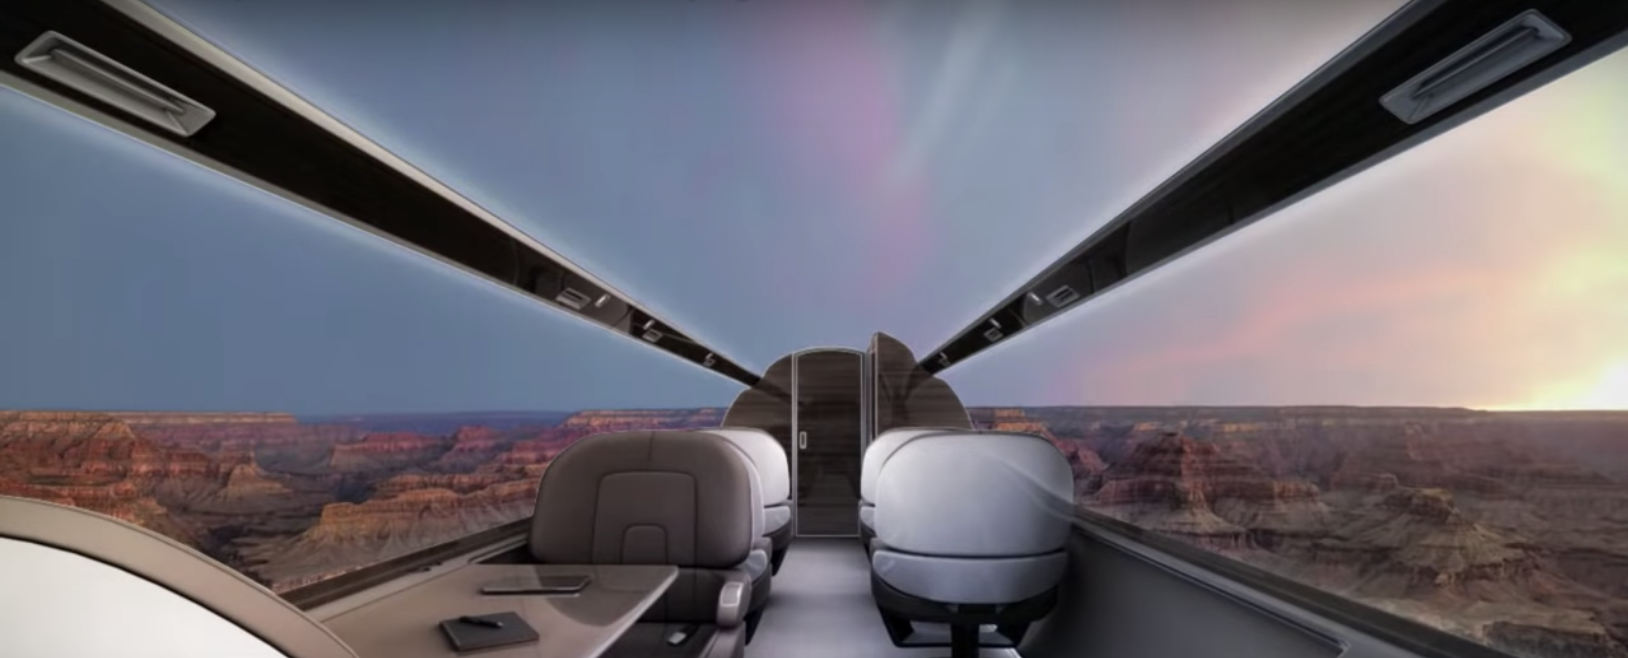 Securing A Window Seat Just Got Easier With Windowless Planes